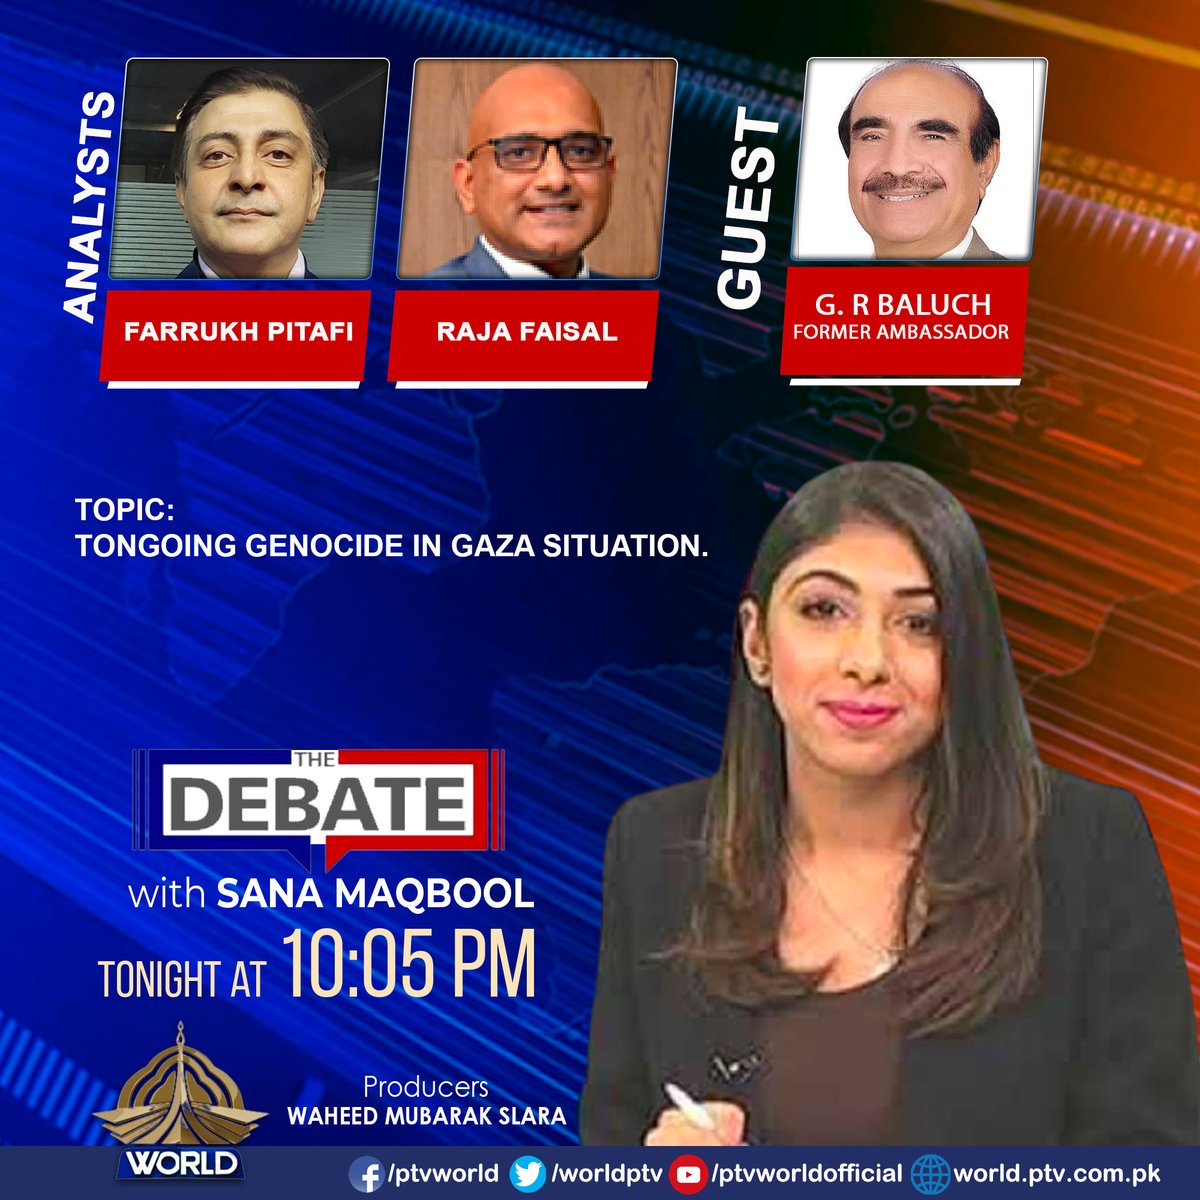 Watch 'The Debate' Tonight at 10:05 pm